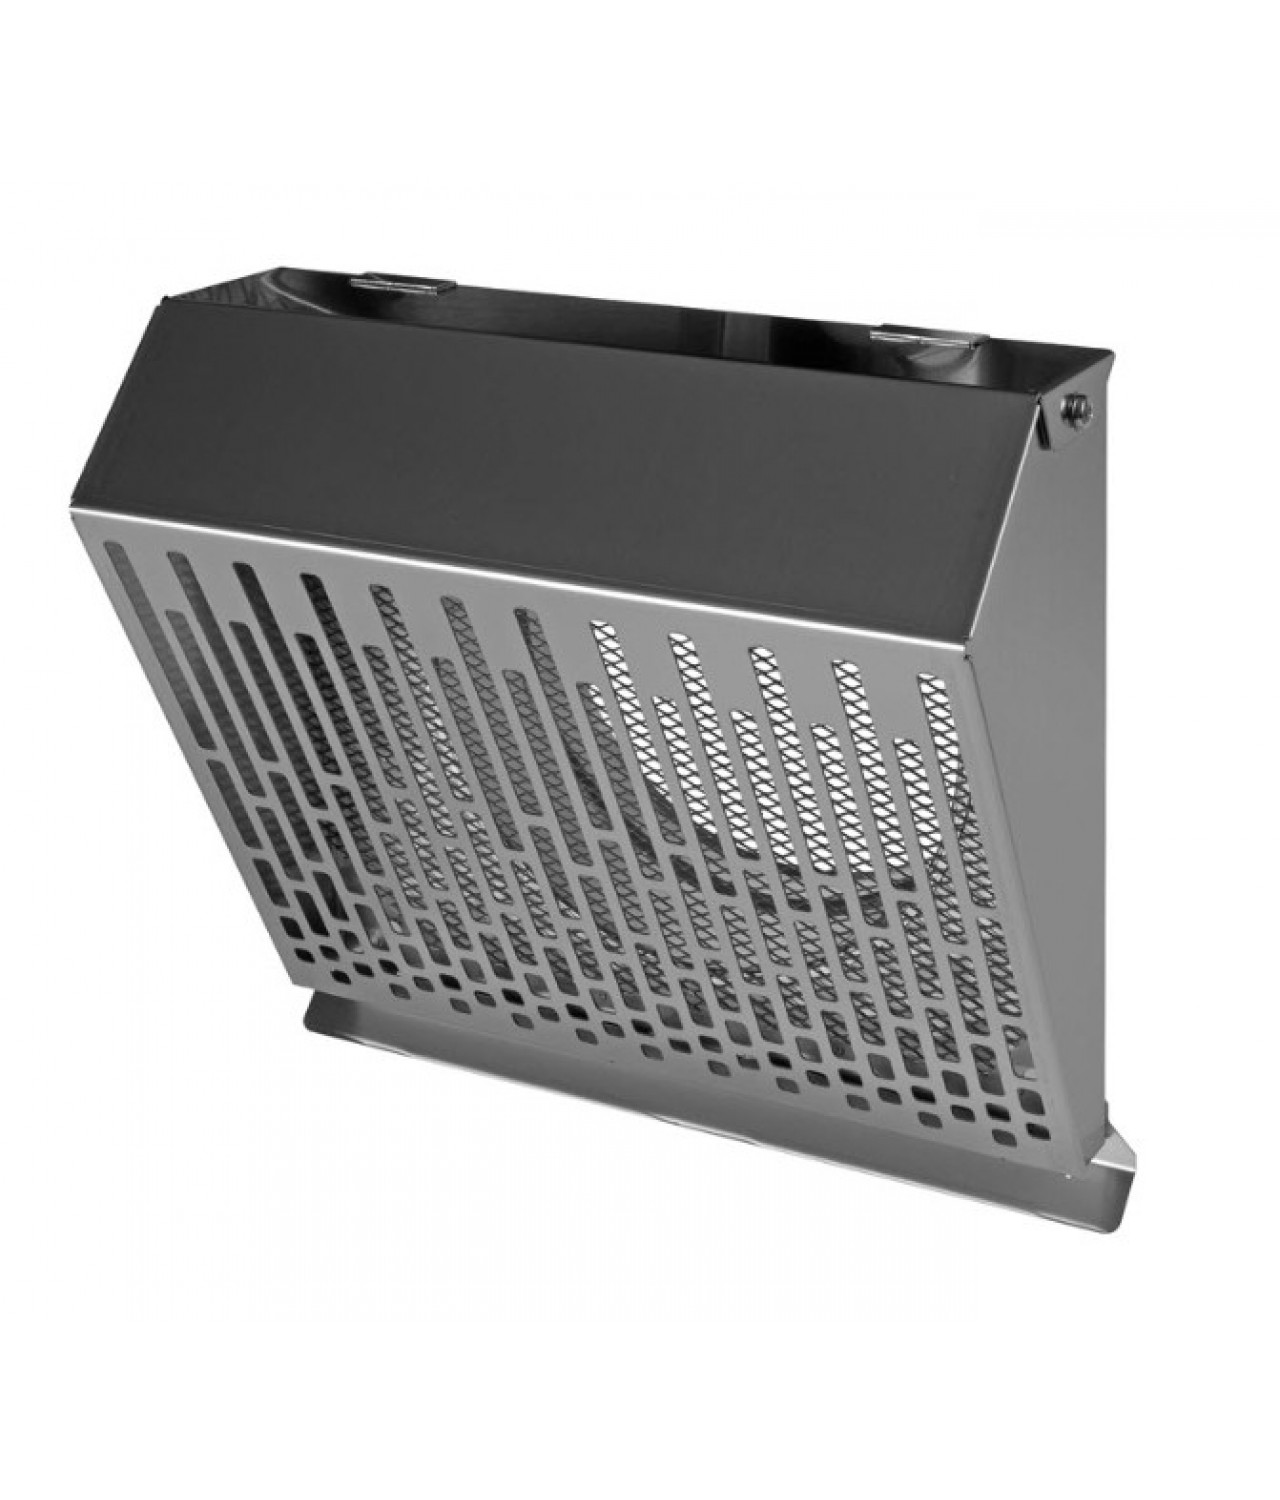 Decorative outdoor vents made of stainless steel DECO VWSM inox, for air exhaust